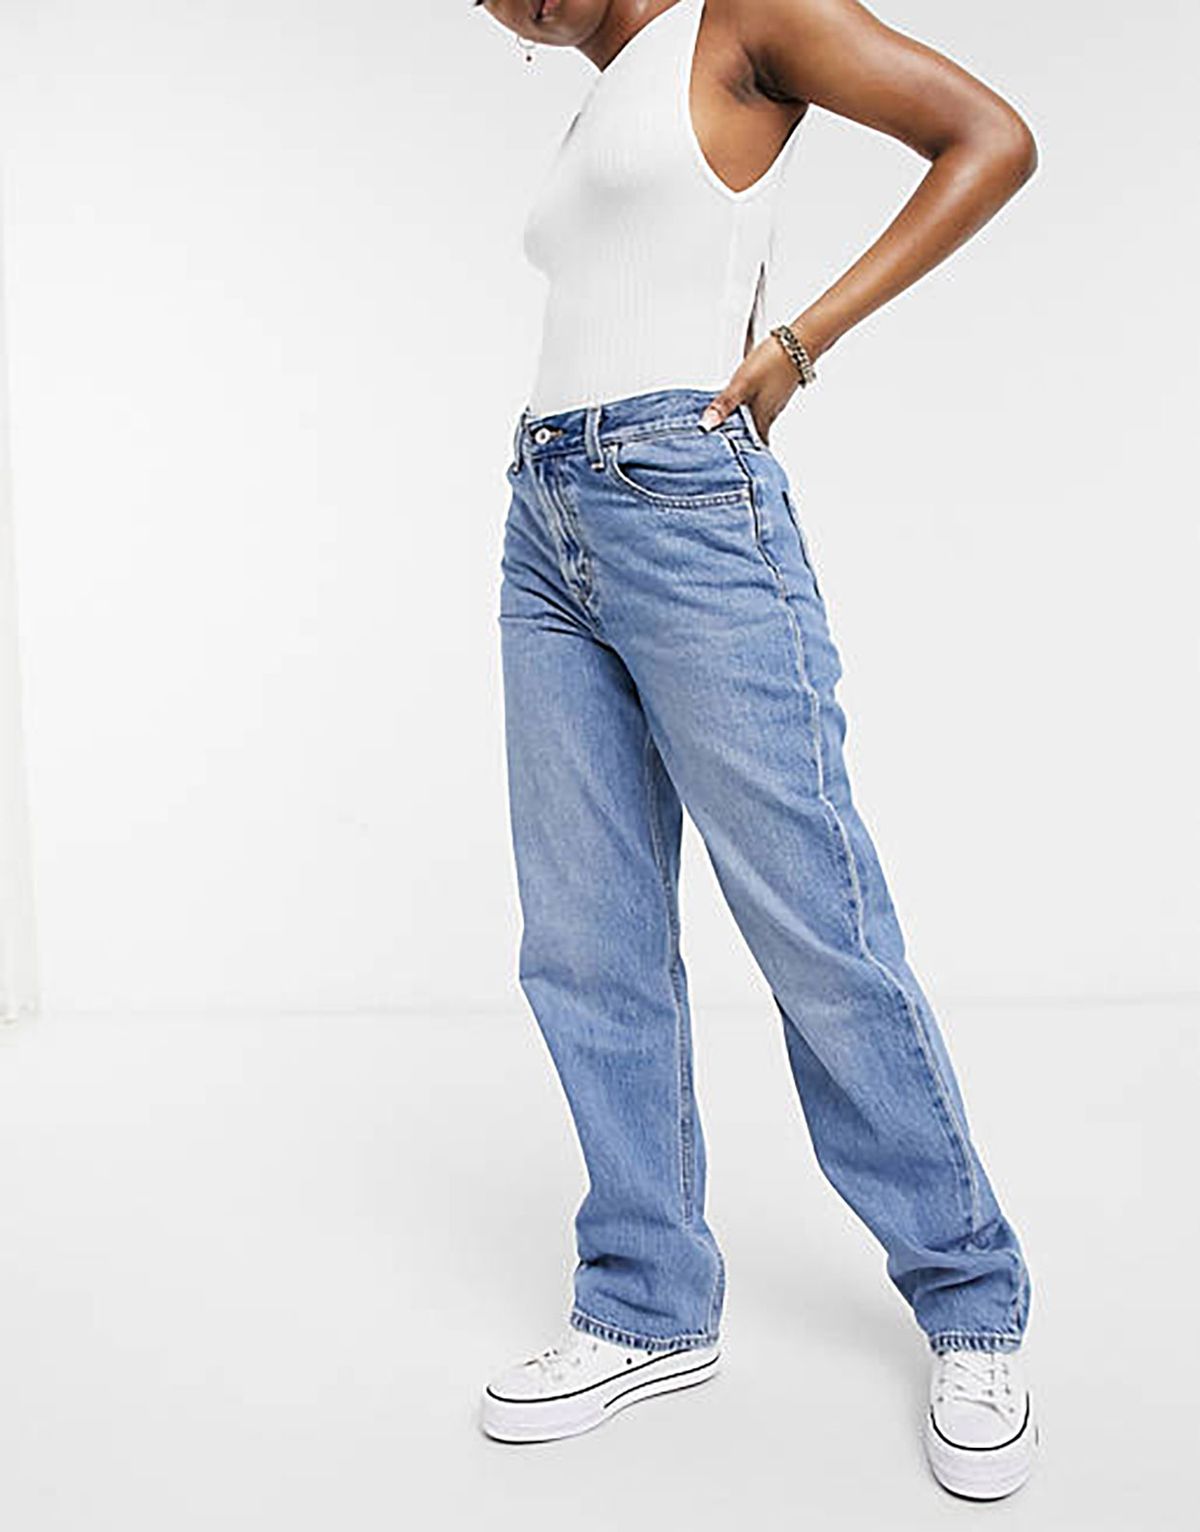 The Best Jeans for Women with Thick Thighs | InStyle